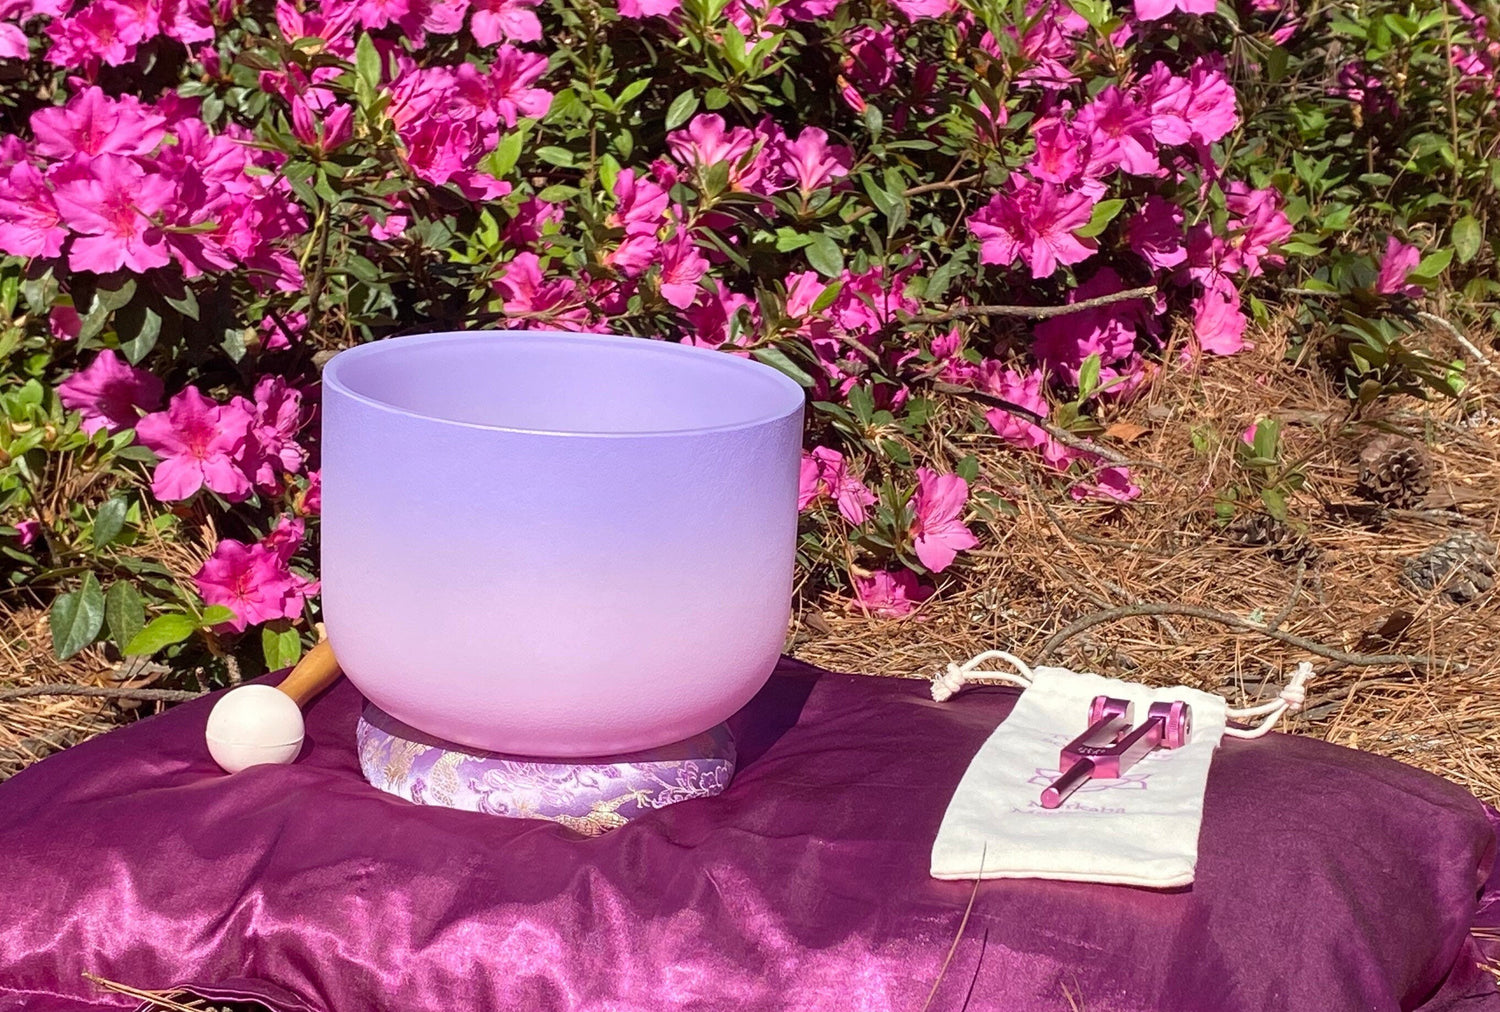 Merkaba Tuning Fork And High Vibration Crown Chakra 8" Crystal Singing Bowl 432HZ B-Note w/ Bag Bundle, Gift For Her